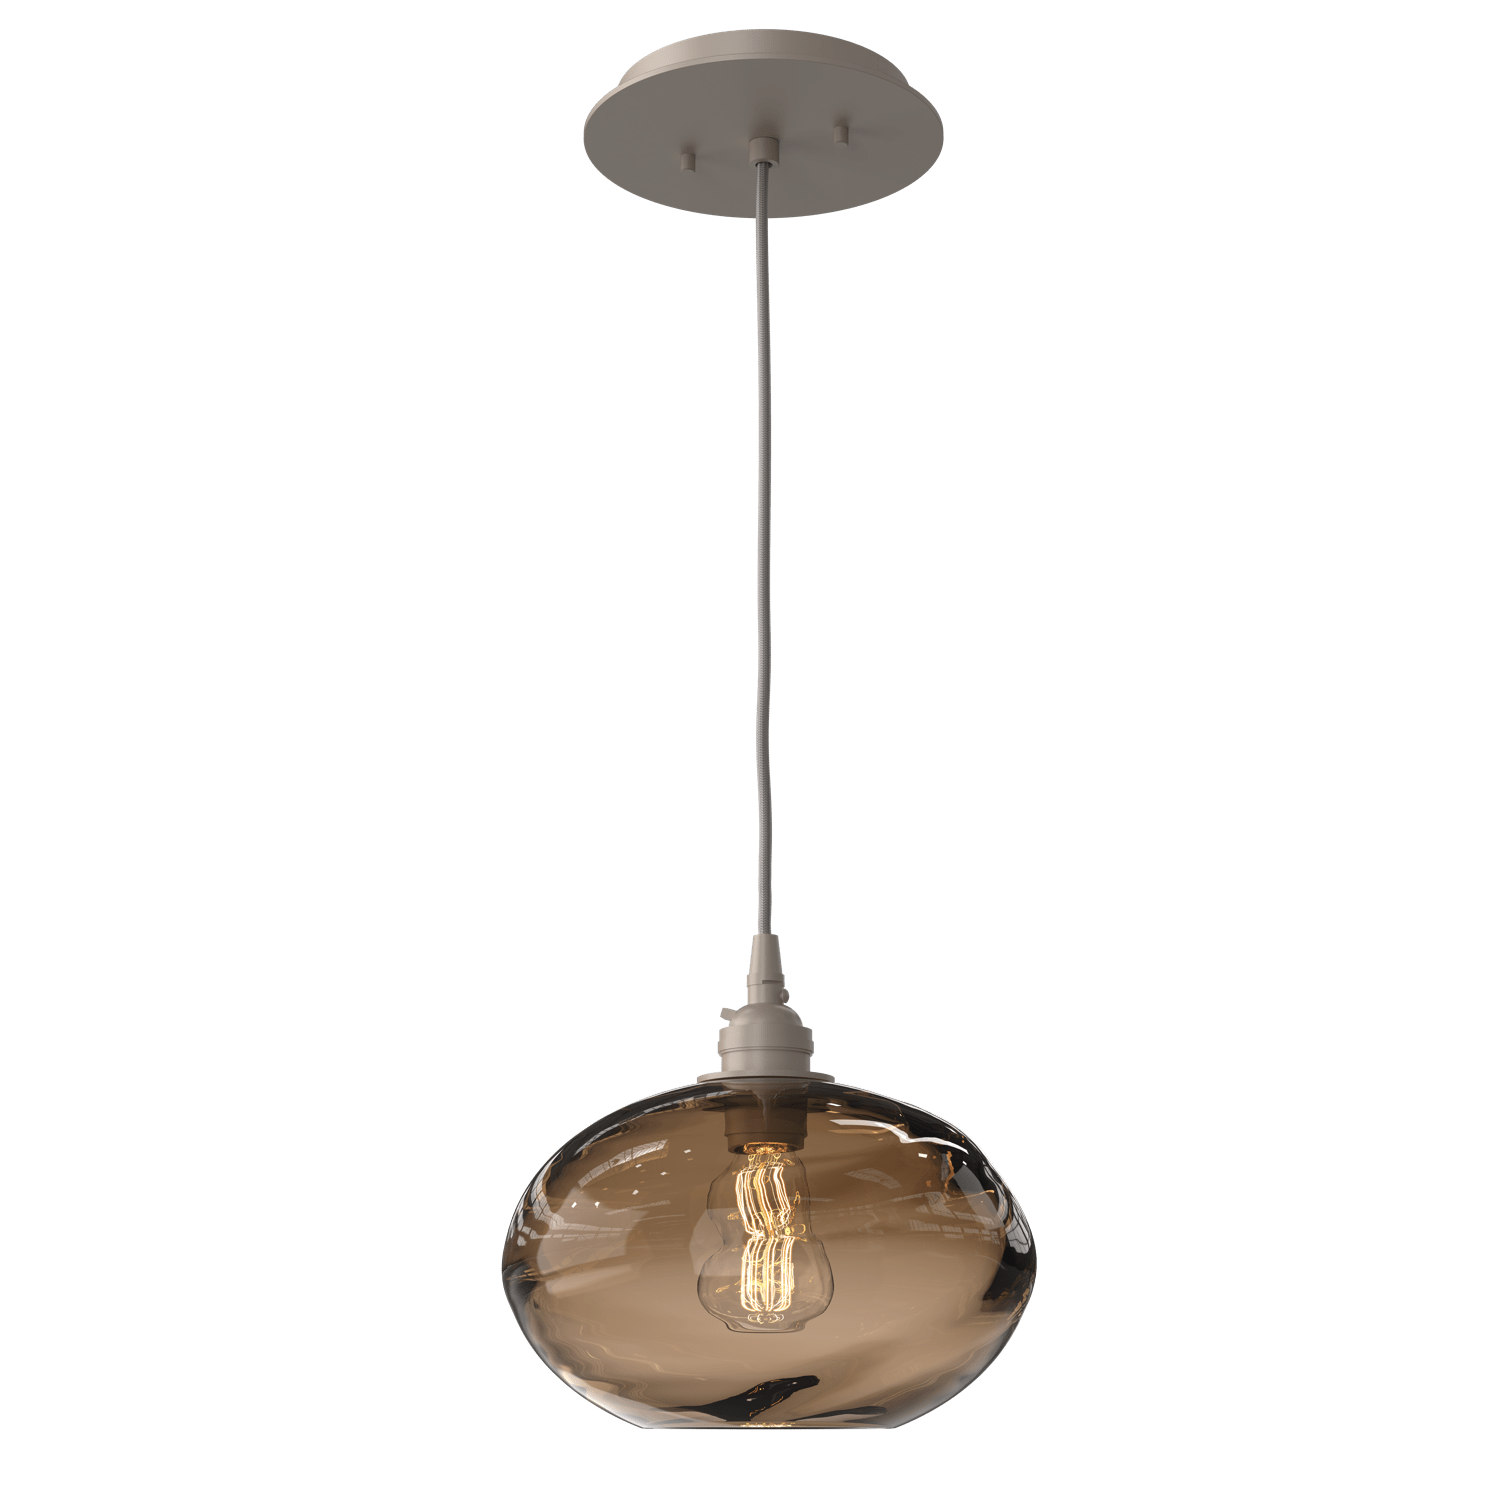 LAB0036-01-BS-OB-Hammerton-Studio-Optic-Blown-Glass-Coppa-pendant-light-with-metallic-beige-silver-finish-and-optic-bronze-blown-glass-shades-and-incandescent-lamping